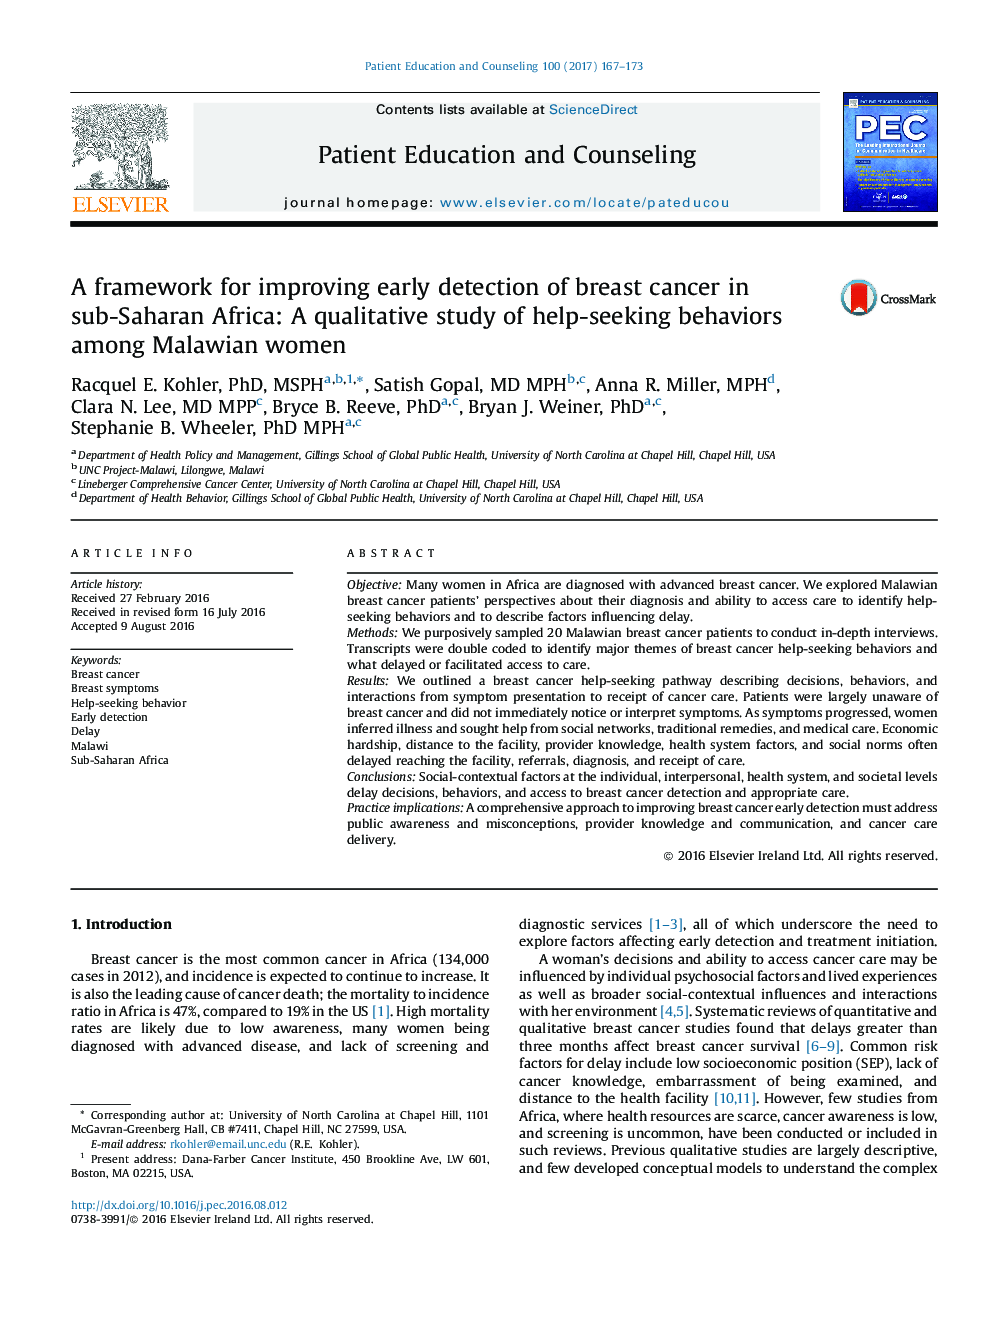 A framework for improving early detection of breast cancer in sub-Saharan Africa: A qualitative study of help-seeking behaviors among Malawian women